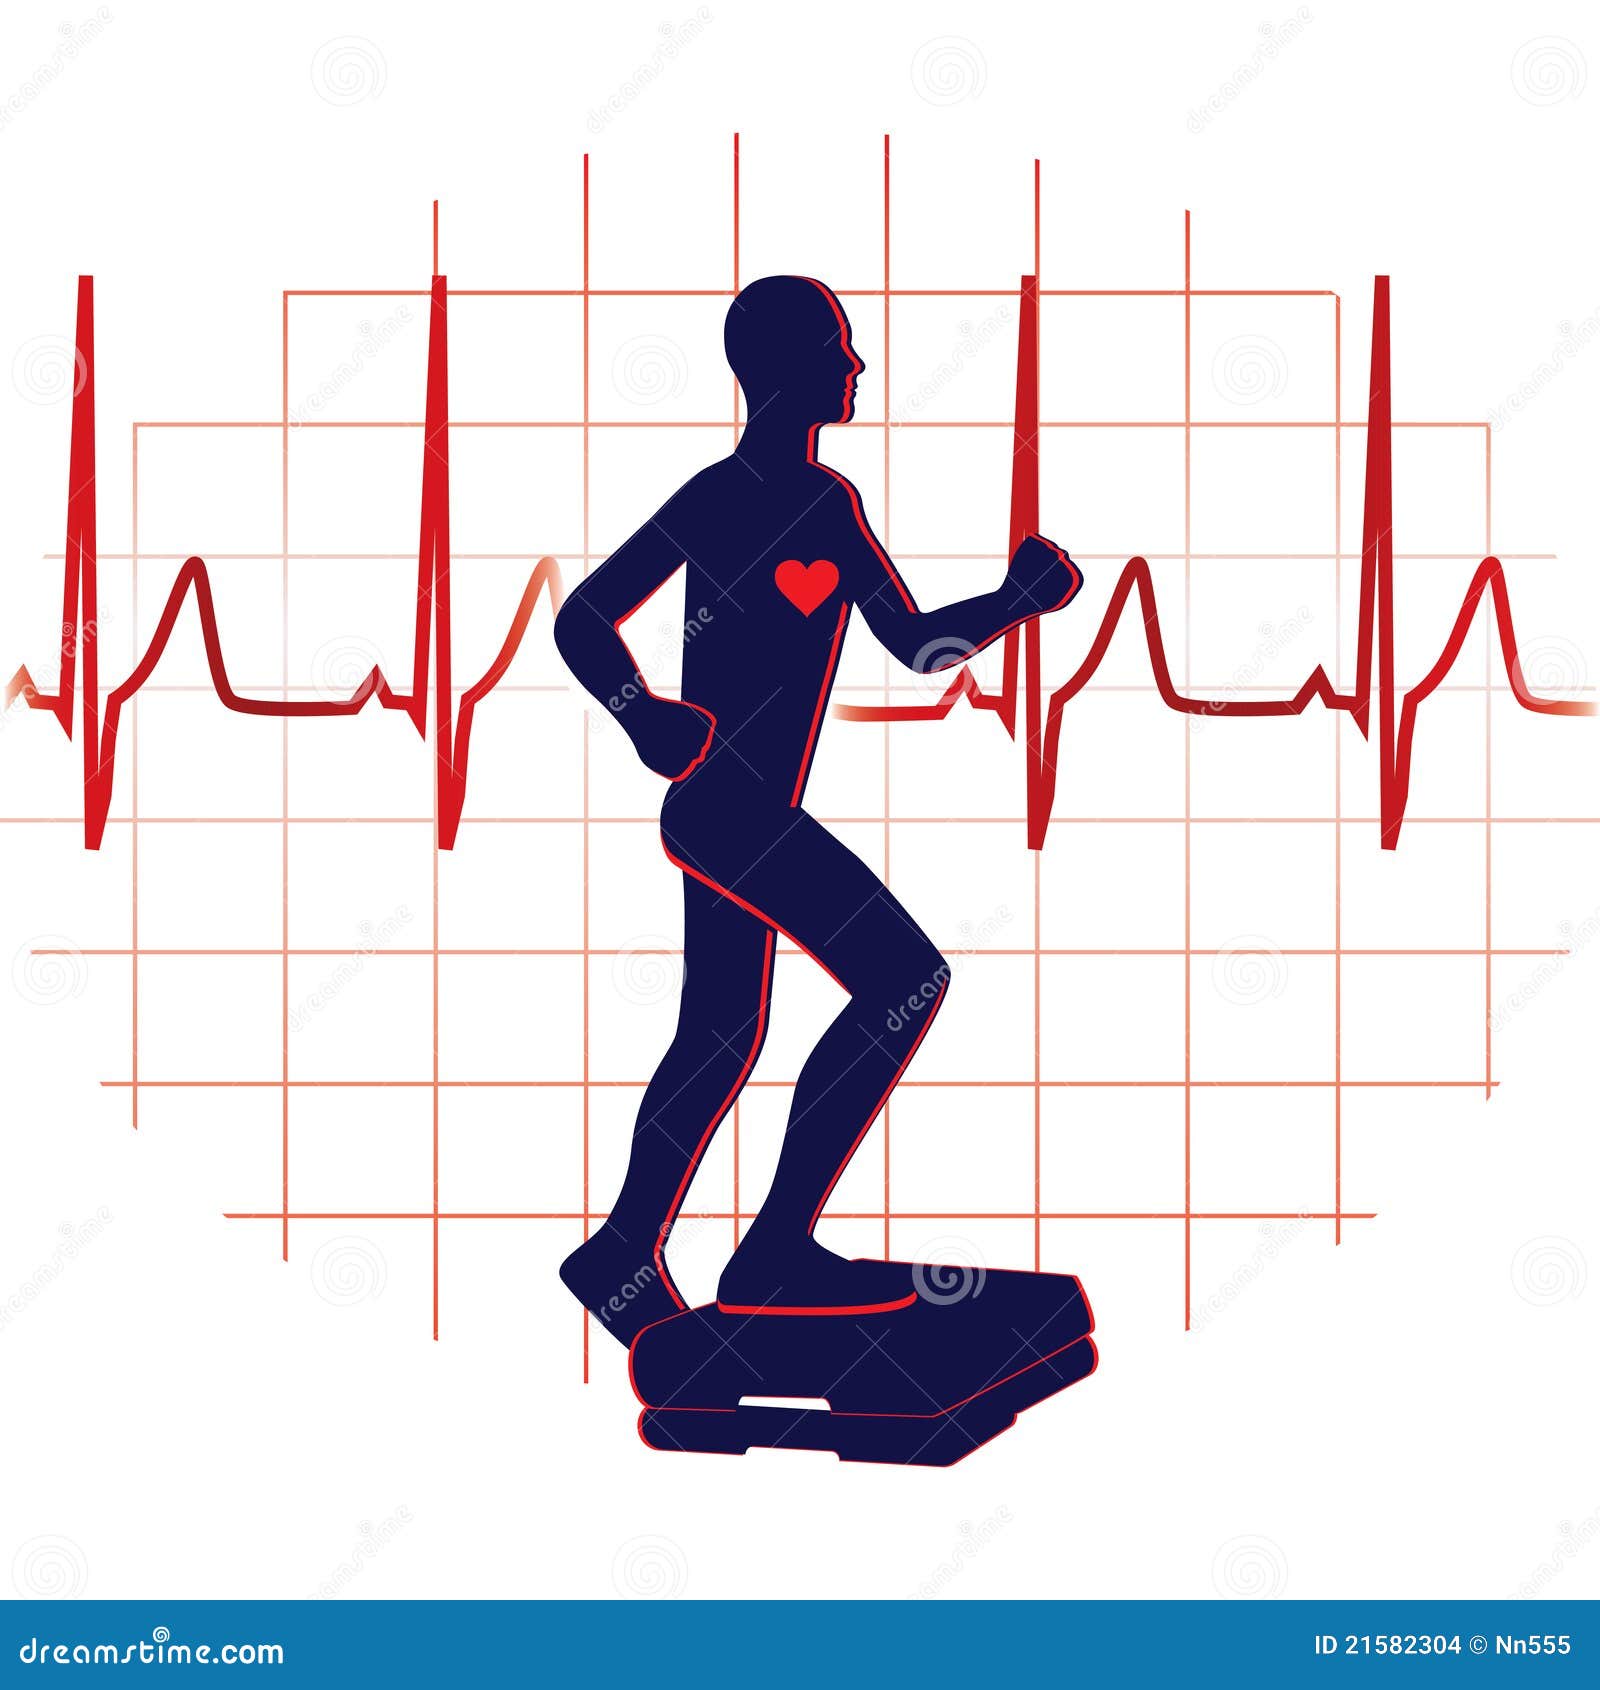 clipart step fitness - photo #35